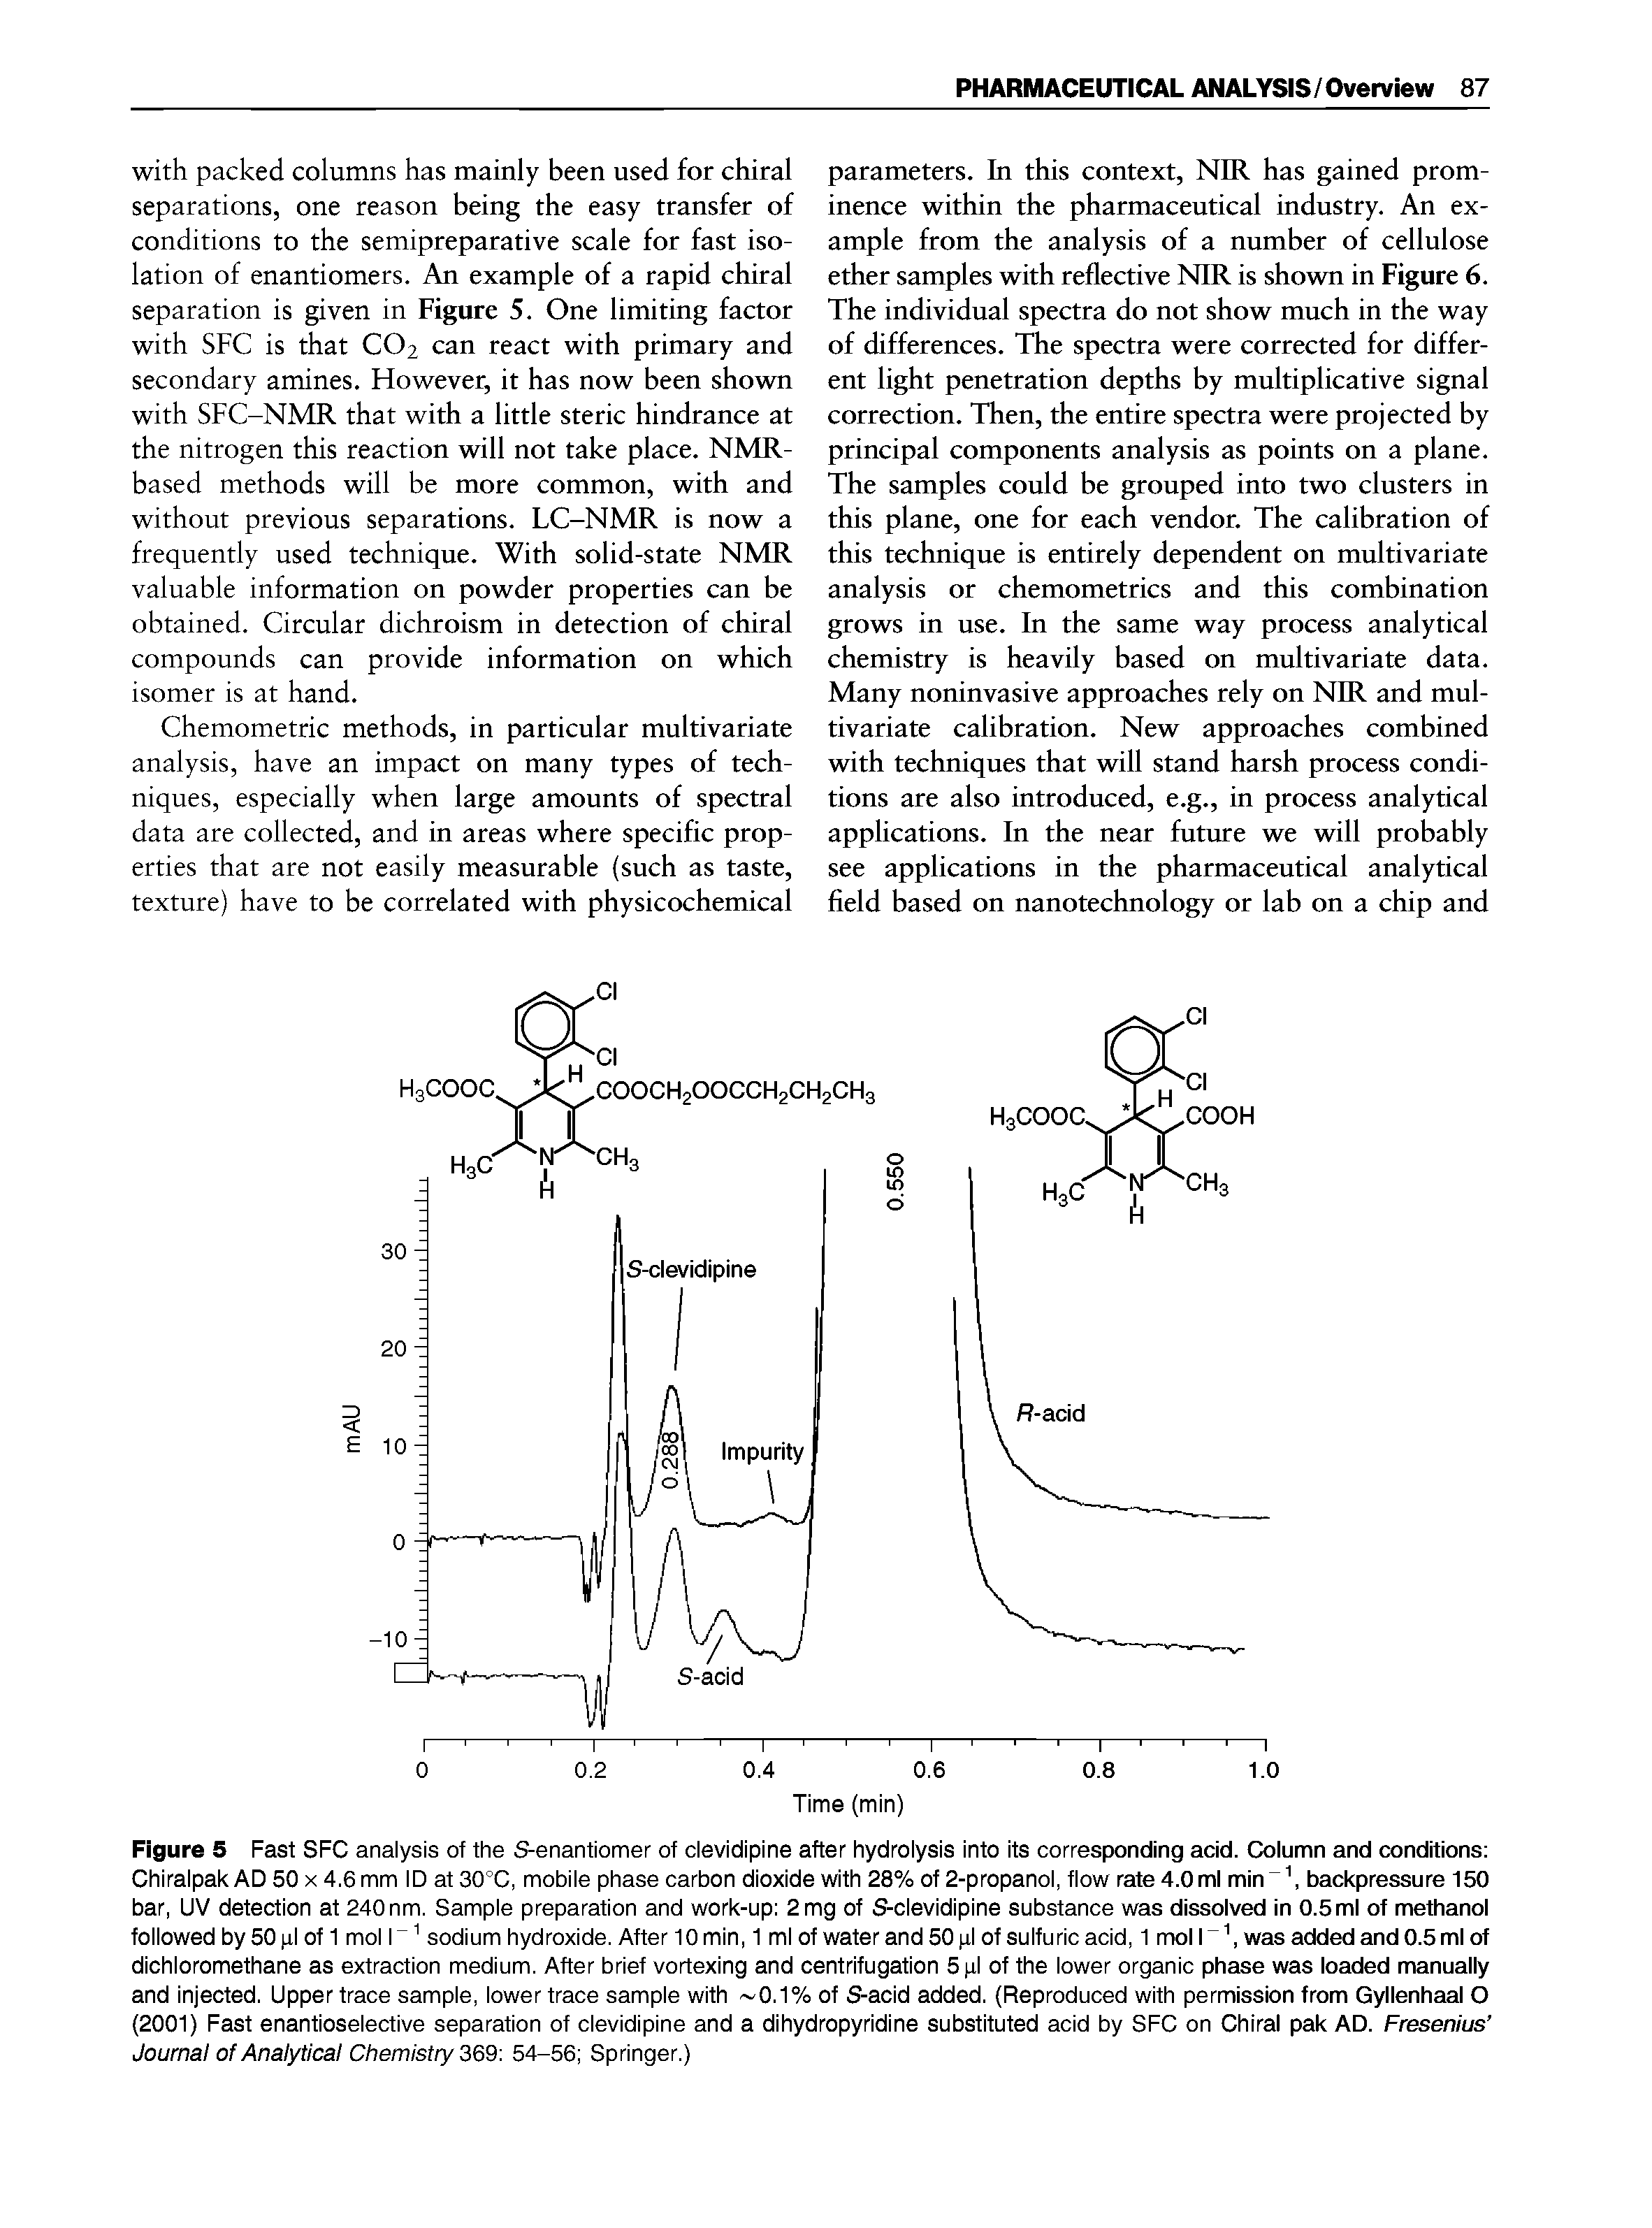 Figure 5 Fast SFC analysis of the S-enantiomer of clevidipine after hydrolysis into its corresponding acid. Column and conditions Chiralpak AD 50 x 4.6 mm ID at 30°C, mobile phase carbon dioxide with 28% of 2-propanol, flow rate 4.0 ml min backpressure 150 bar, UV detection at 240 nm. Sample preparation and work-up 2 mg of S-clevidipine substance was dissolved in 0.5ml of methanol followed by 50 pi of 1 mol r sodium hydroxide. After 10 min, 1 ml of water and 50 pi of sulfuric acid, 1 mol l was added and 0.5ml of dichloromethane as extraction medium. After brief vortexing and centrifugation 5 pi of the lower organic phase was loaded manually and injected. Upper trace sample, lower trace sample with 0.1% of S-acid added. (Reproduced with permission from Gyllenhaal O (2001) Fast enantioselective separation of clevidipine and a dihydropyridine substituted acid by SFC on Chiral pak AD. Fresenius Journal of Analytical Chemistry 369-. 54-56 Springer.)...